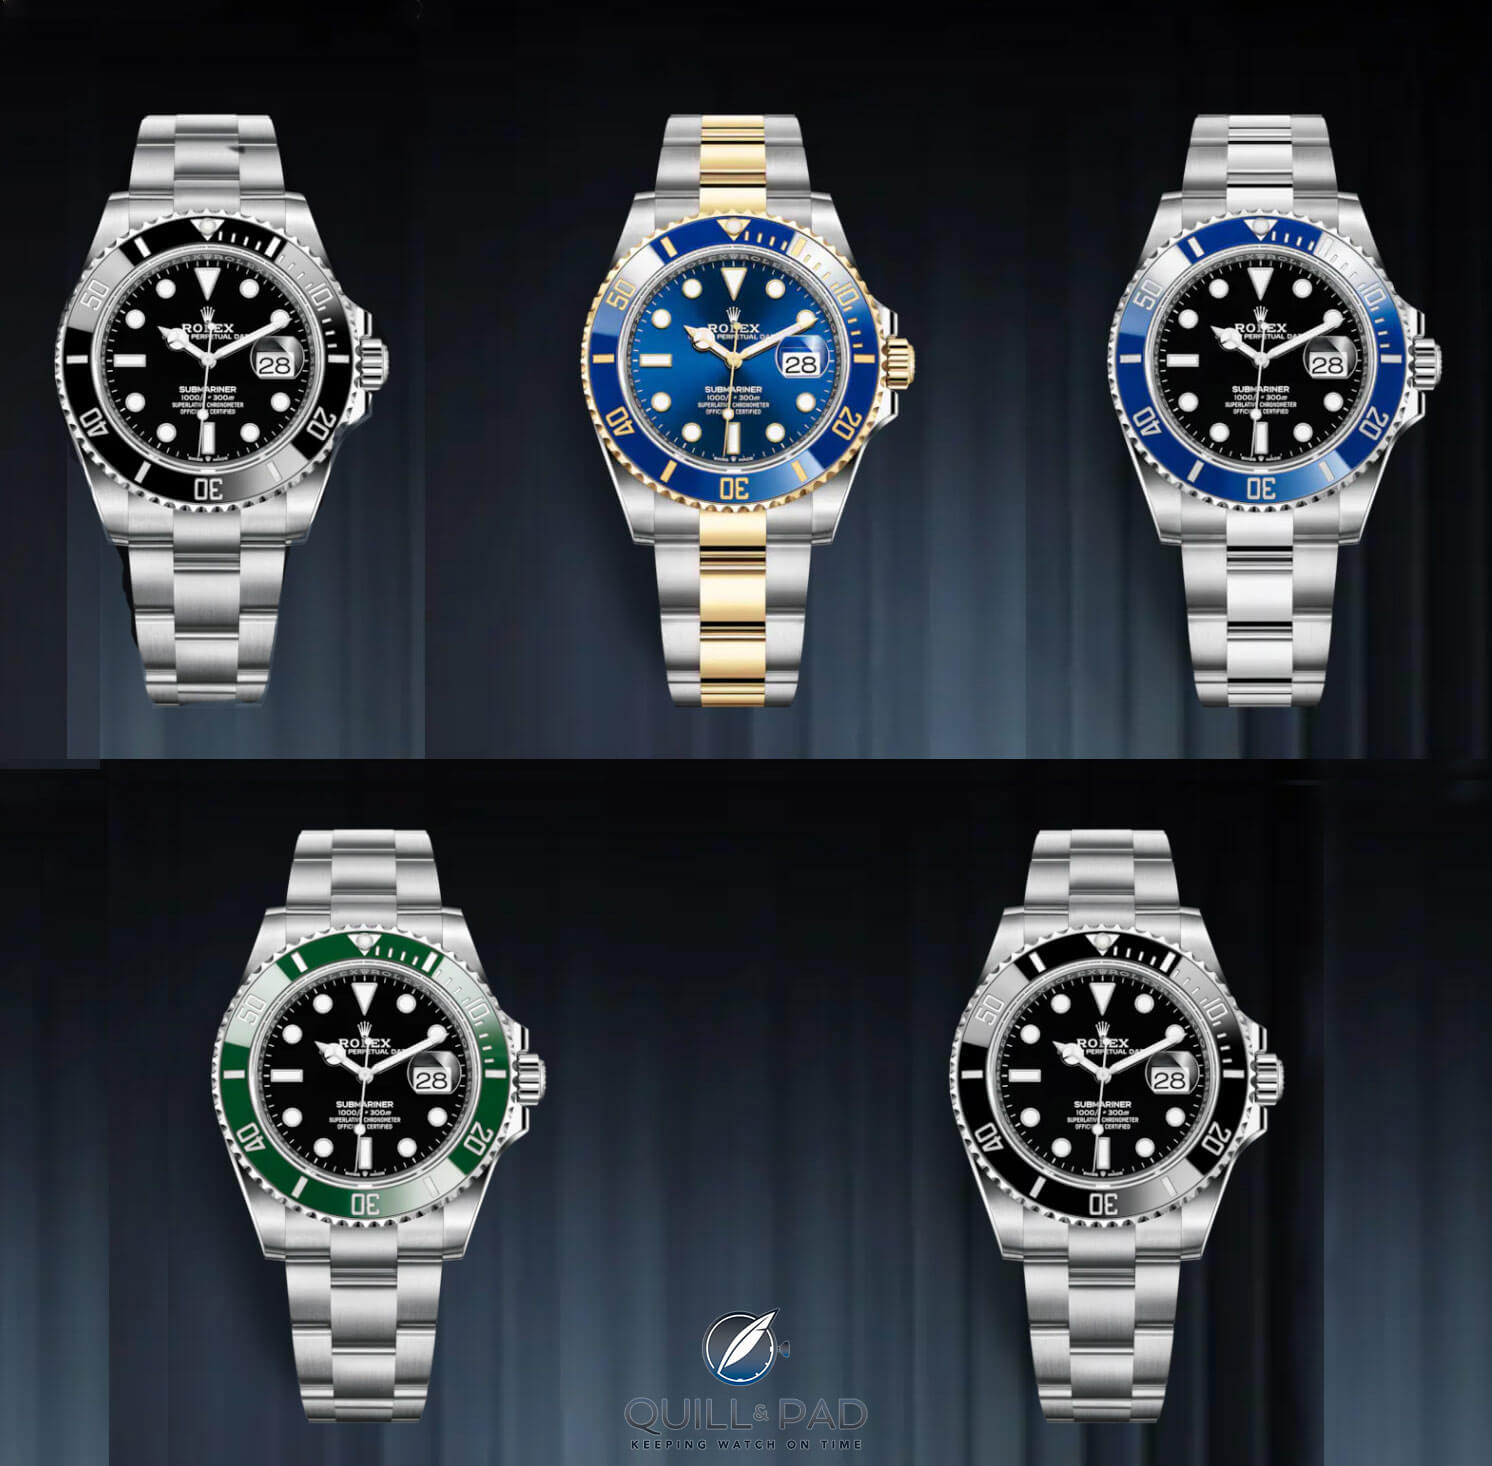 sneen variabel mental All 4 New Rolex 2020 Collection Updates Plus One Watch You Might Have  Missed - Quill & Pad